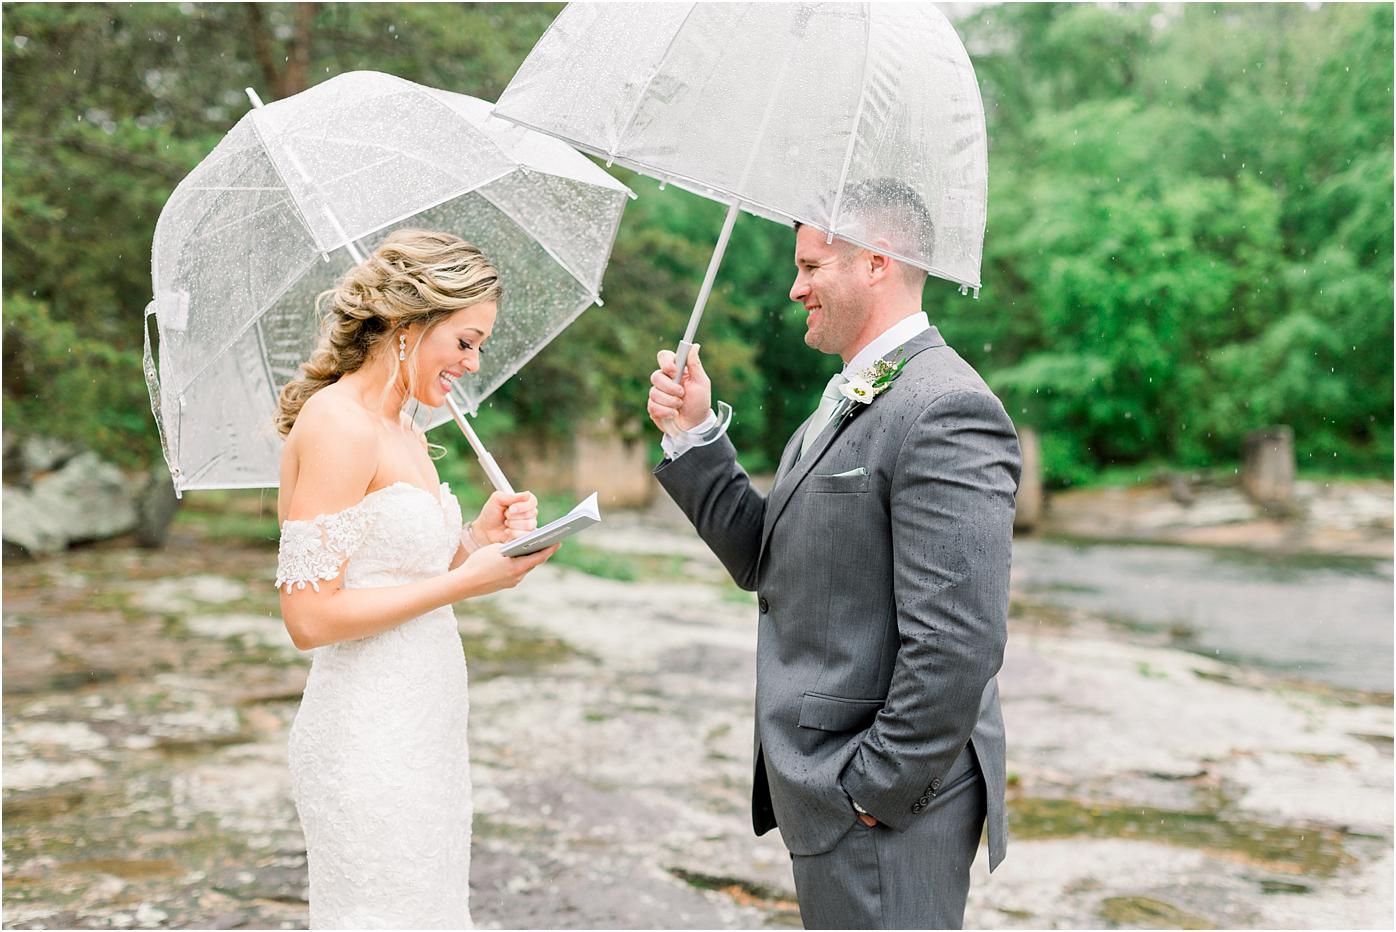 Bride and Groom read vows to one another before their Mill at Fine Creek wedding ceremony under umbrellas.